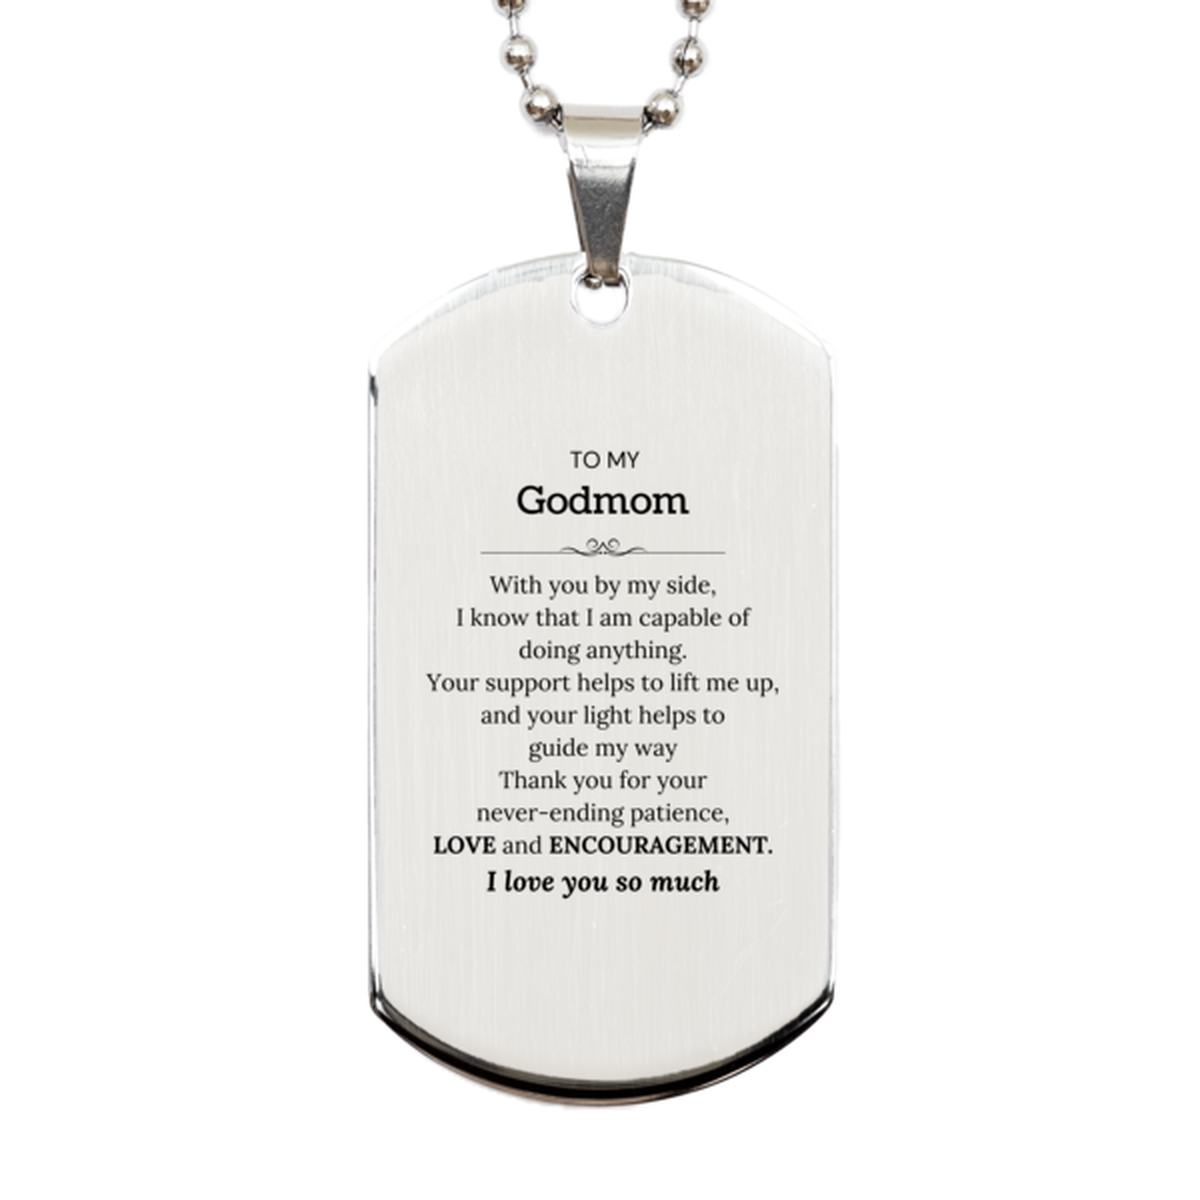 Appreciation Godmom Silver Dog Tag Gifts, To My Godmom Birthday Christmas Wedding Keepsake Gifts for Godmom With you by my side, I know that I am capable of doing anything. I love you so much